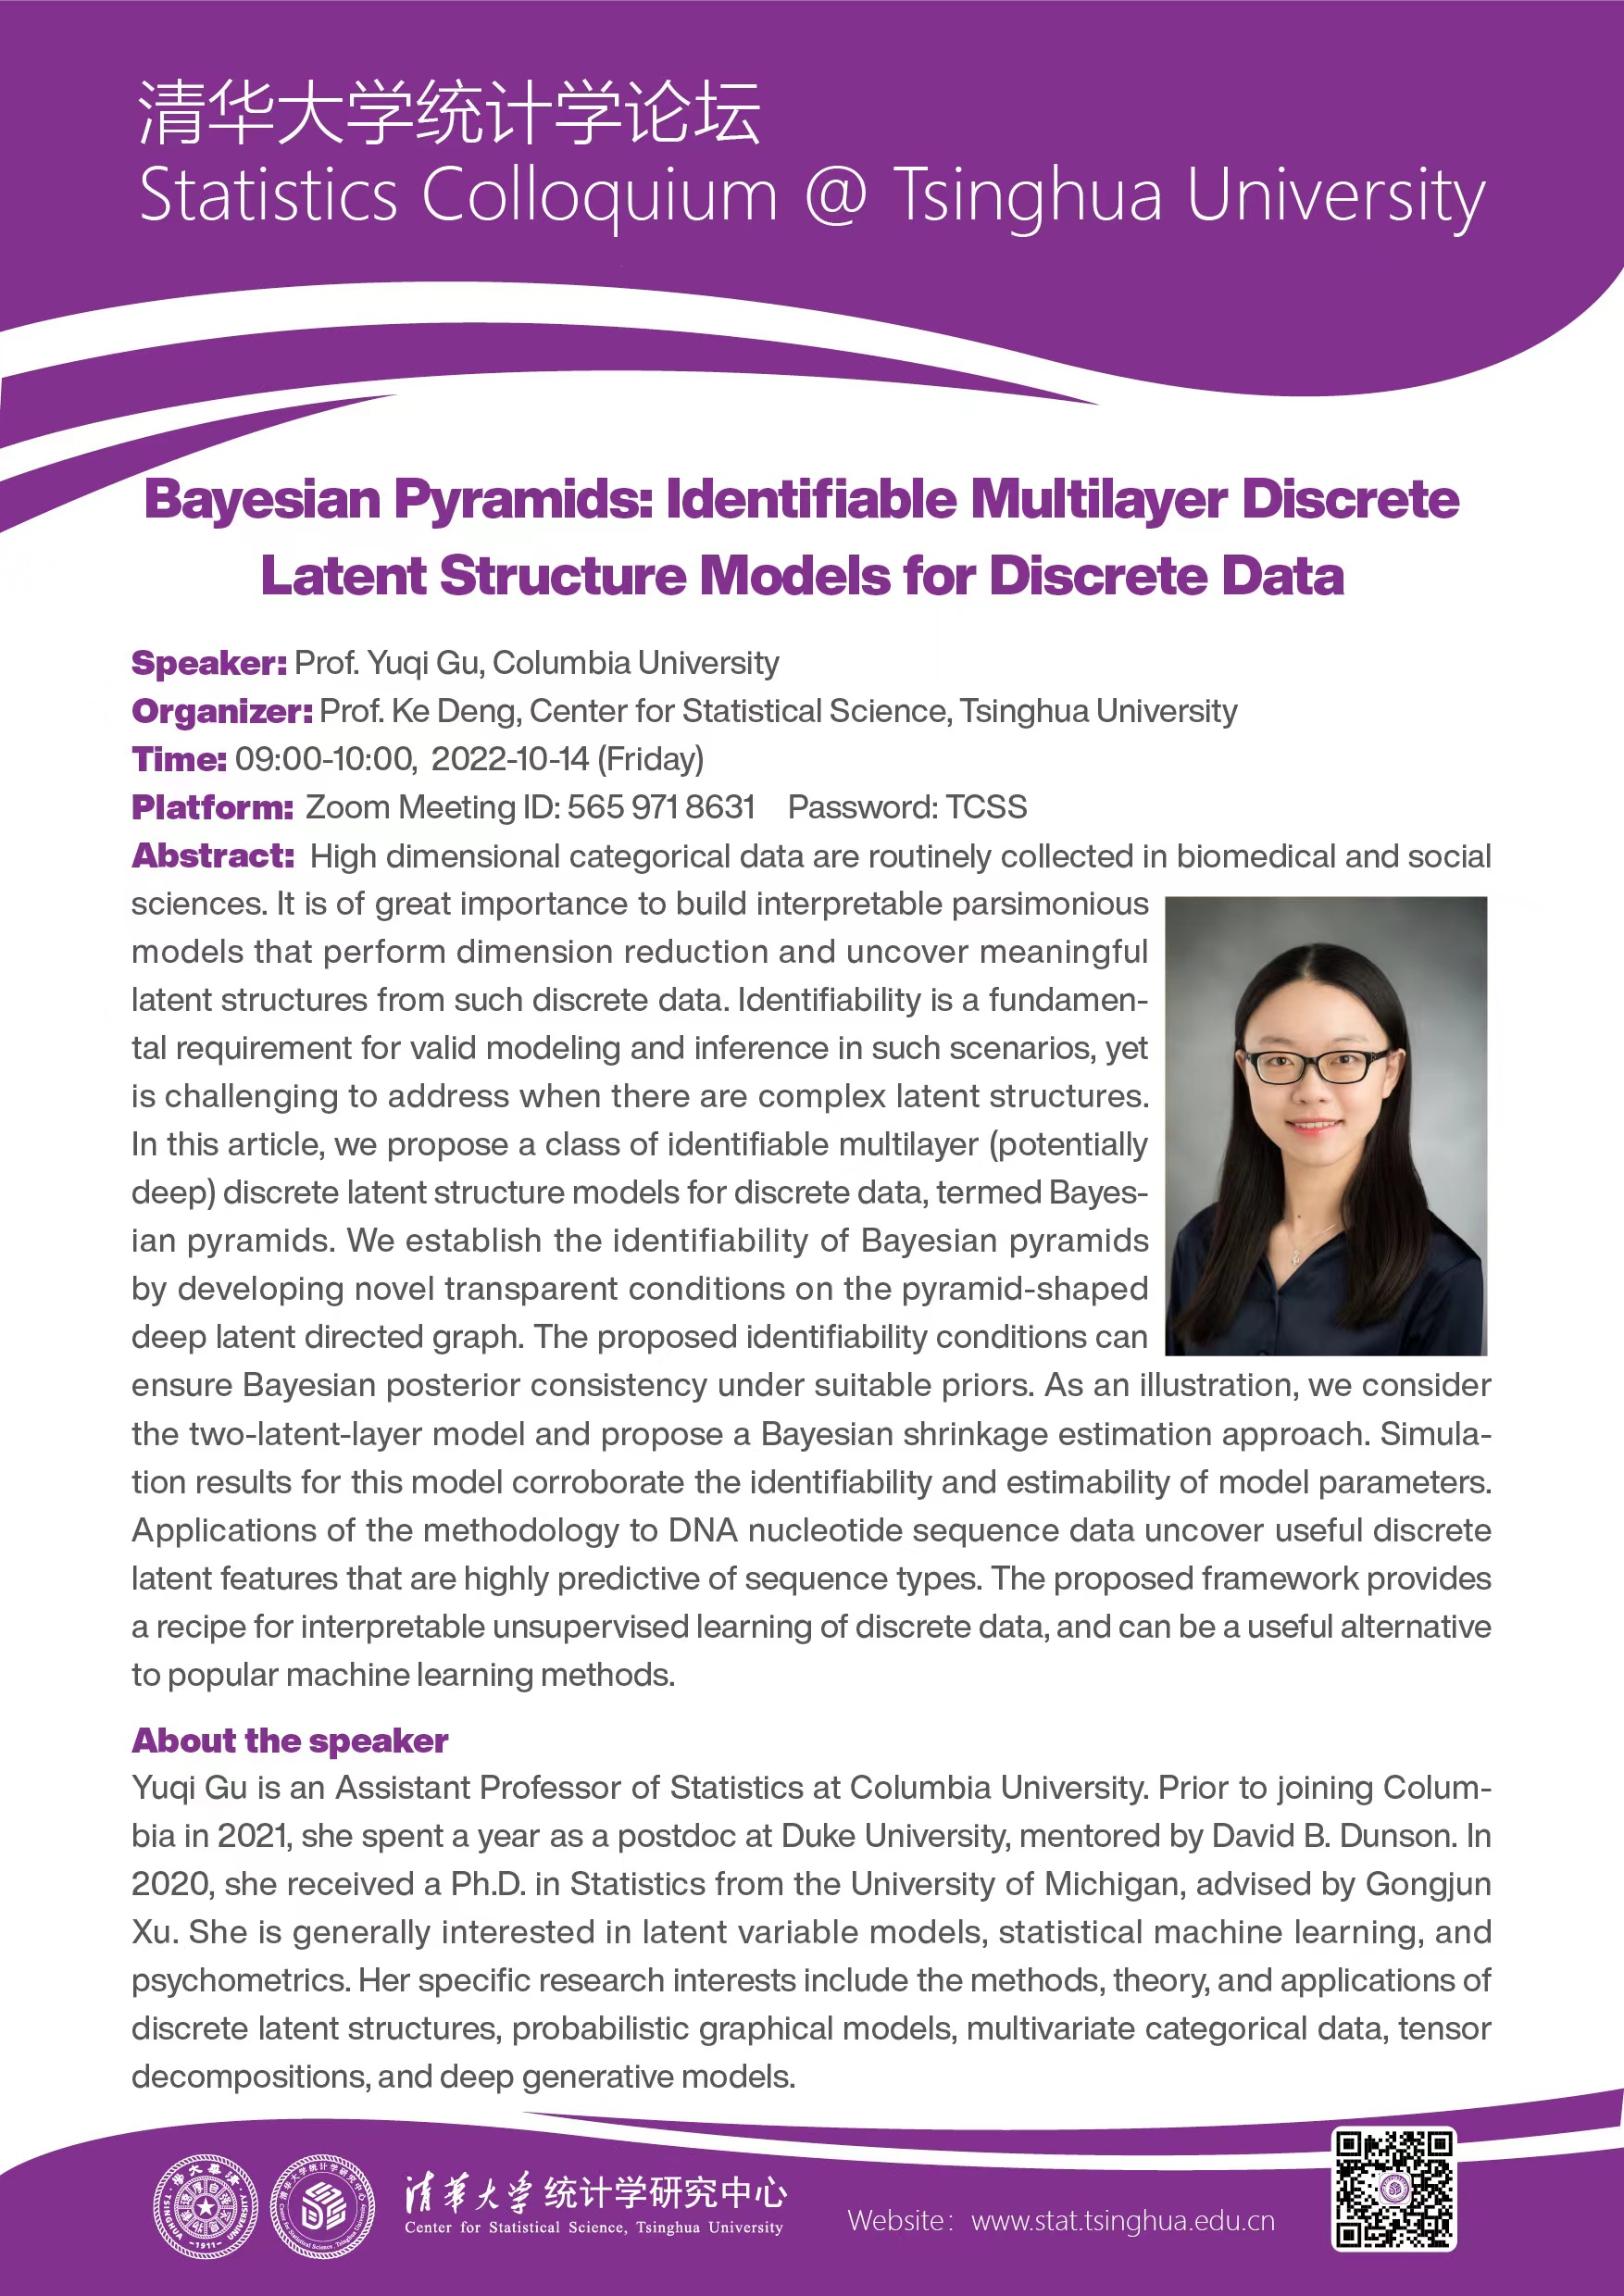 Bayesian Pyramids: Identifiable Multilayer Discrete Latent Structure Models for Discrete Data